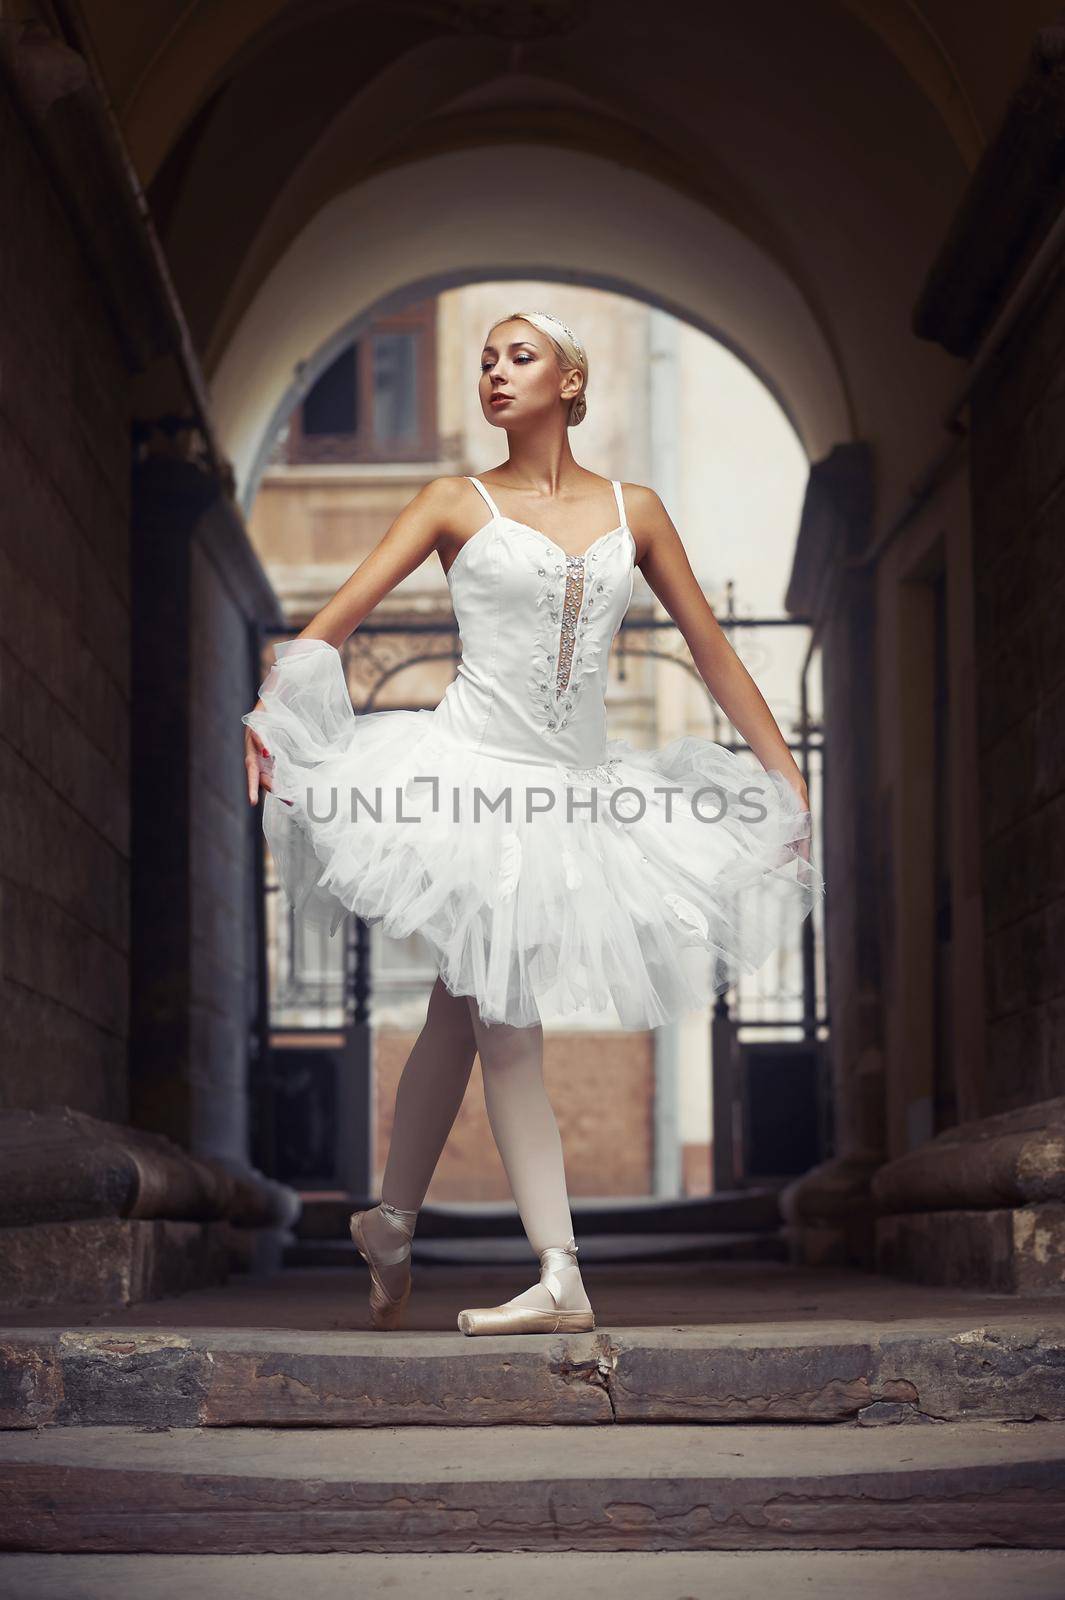 Perfect pirouette. Portrait of a stunning ballerina walking through the archway